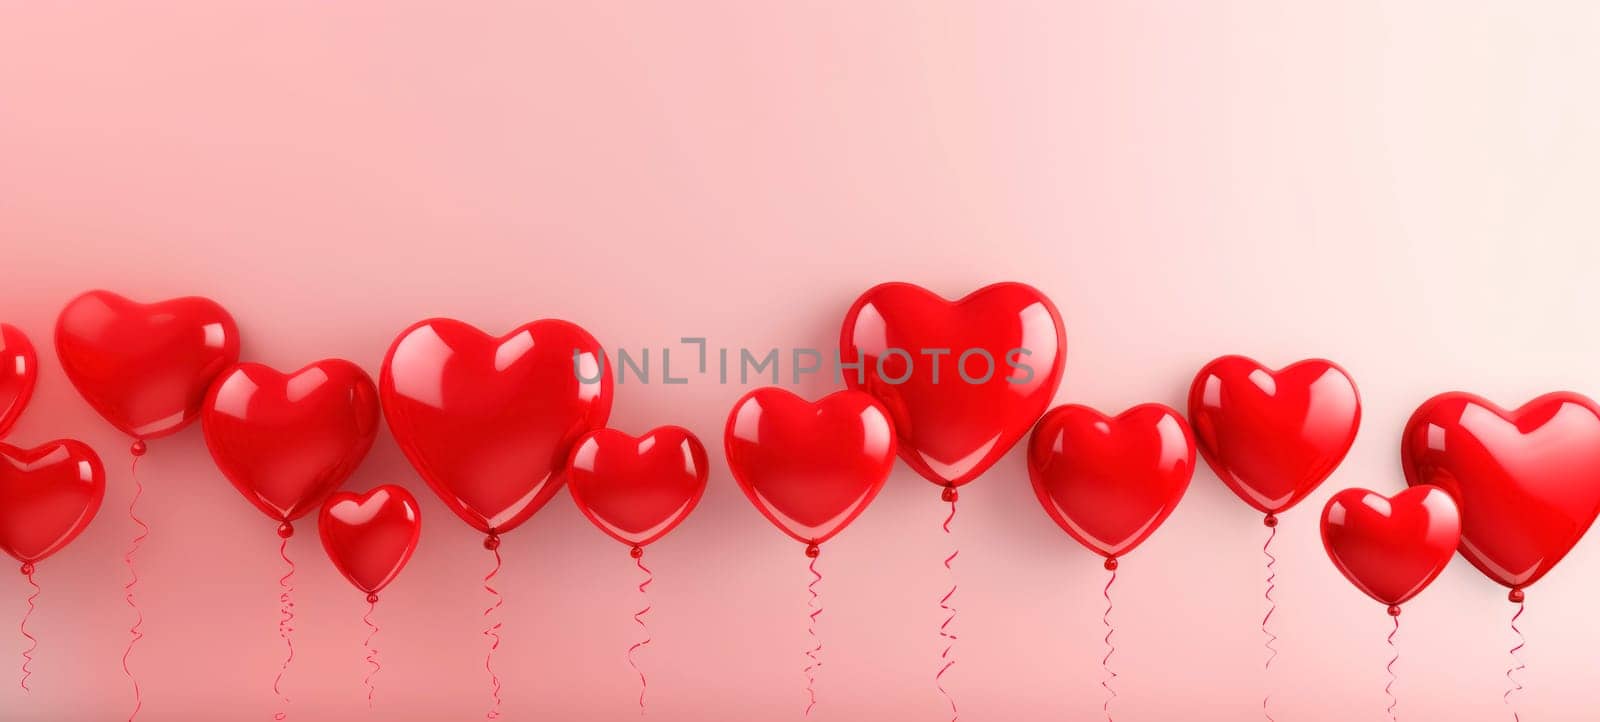 Glossy Red Heart Balloons on Pink Background by andreyz